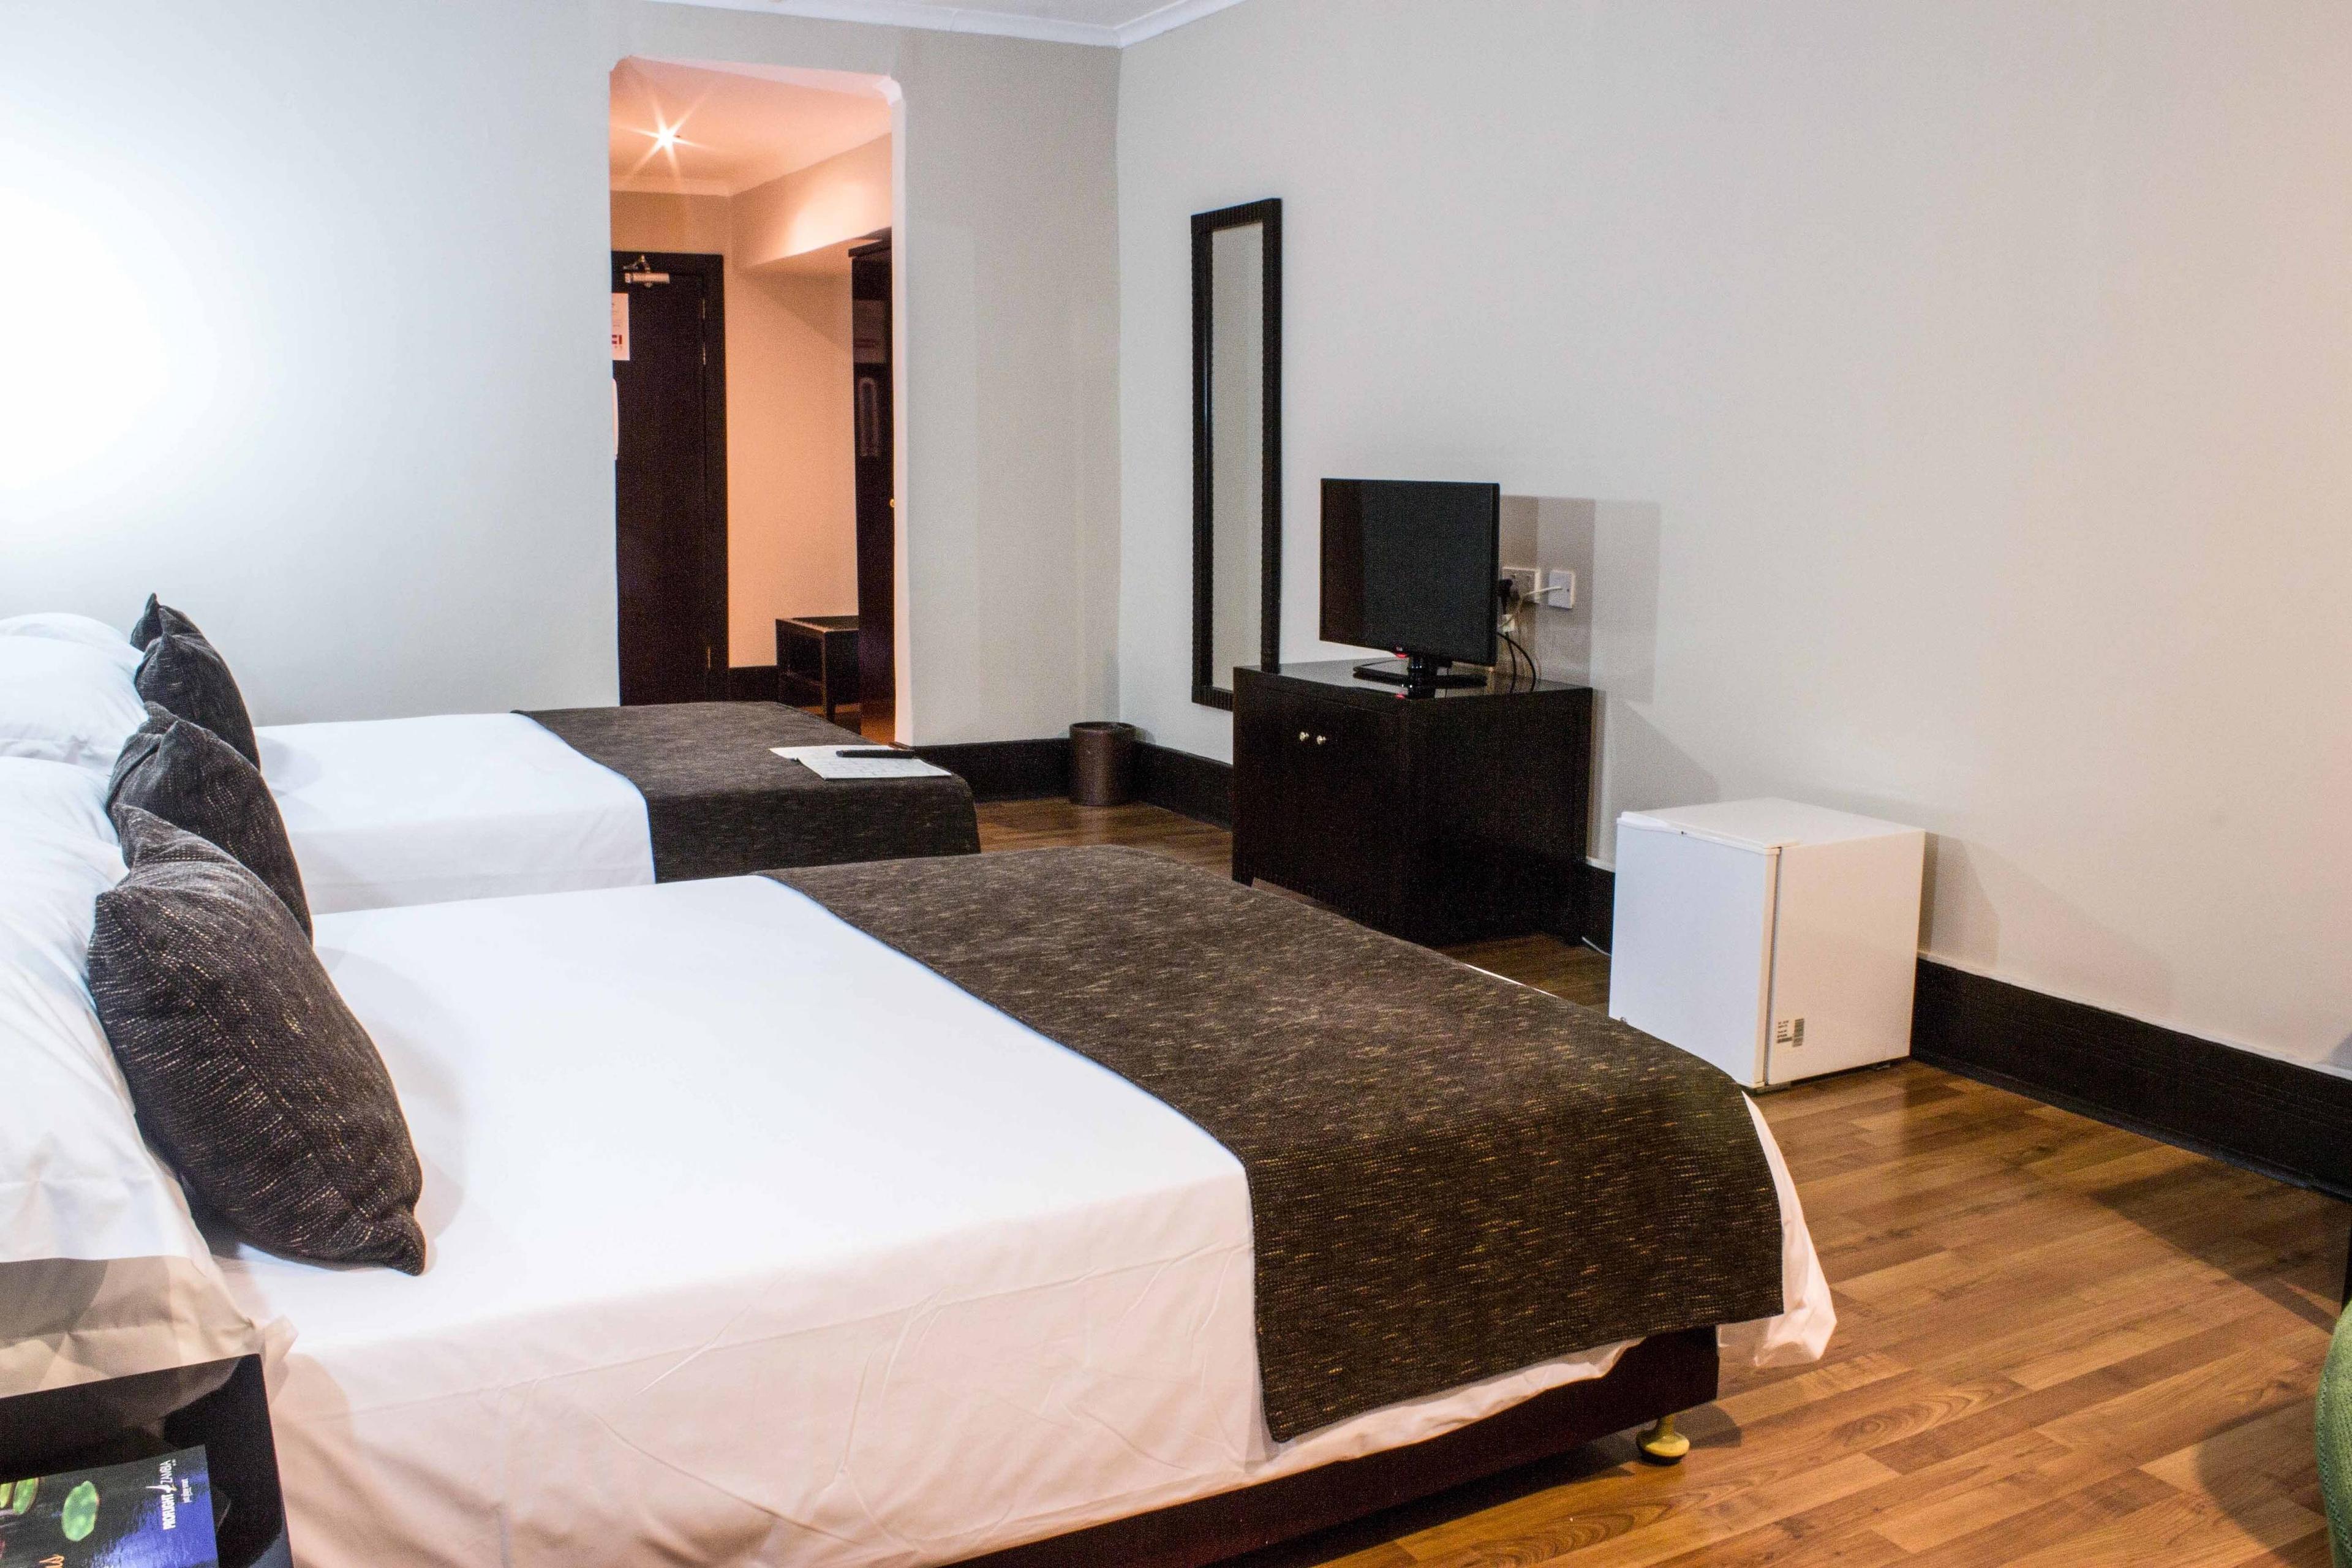 All rooms within the hotel have satellite TV, telephones, electronic locks and safes, hairdryers, Wi-Fi and more.